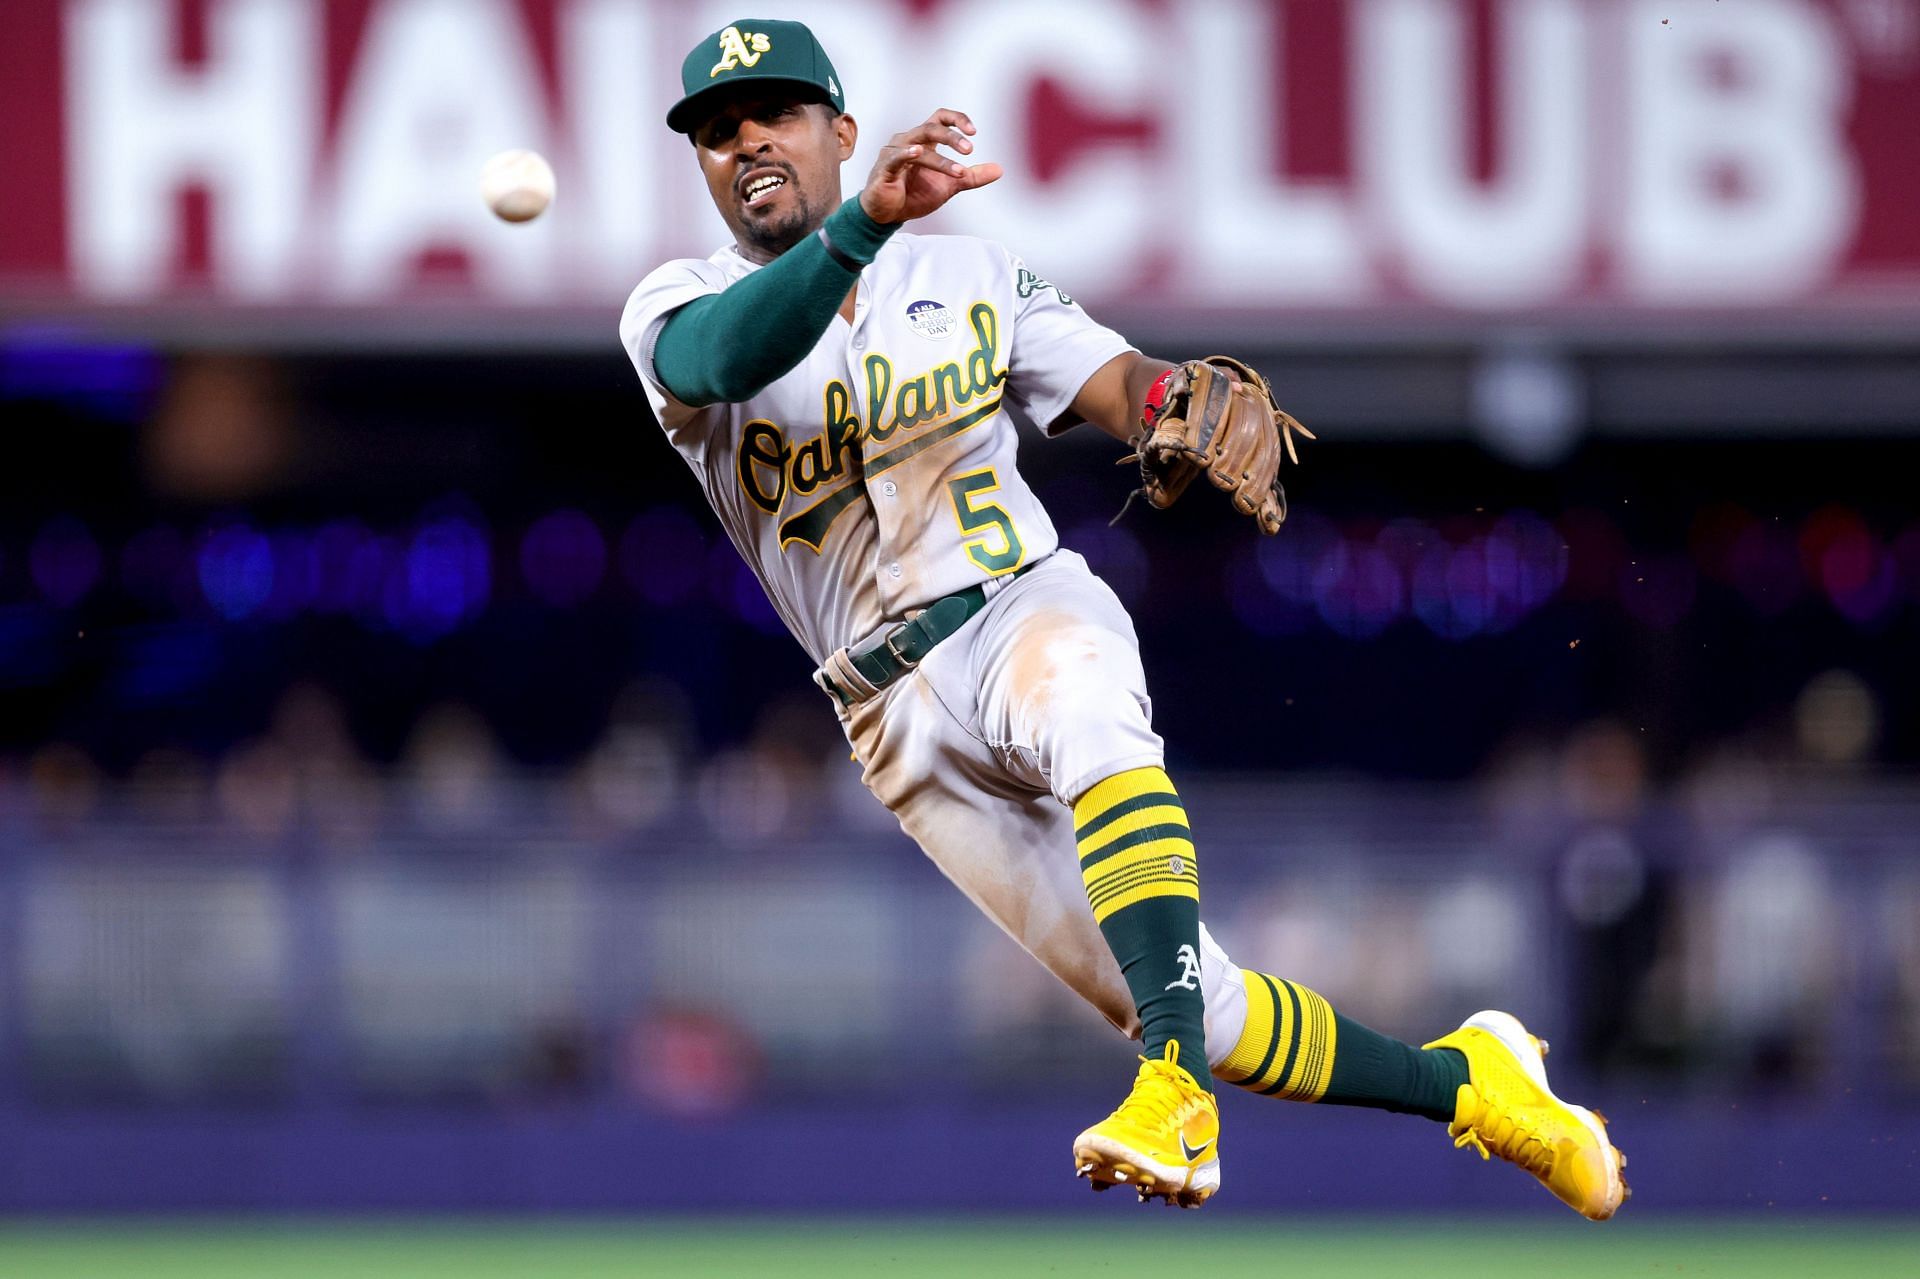 The Oakland Athletics have it very rough right now